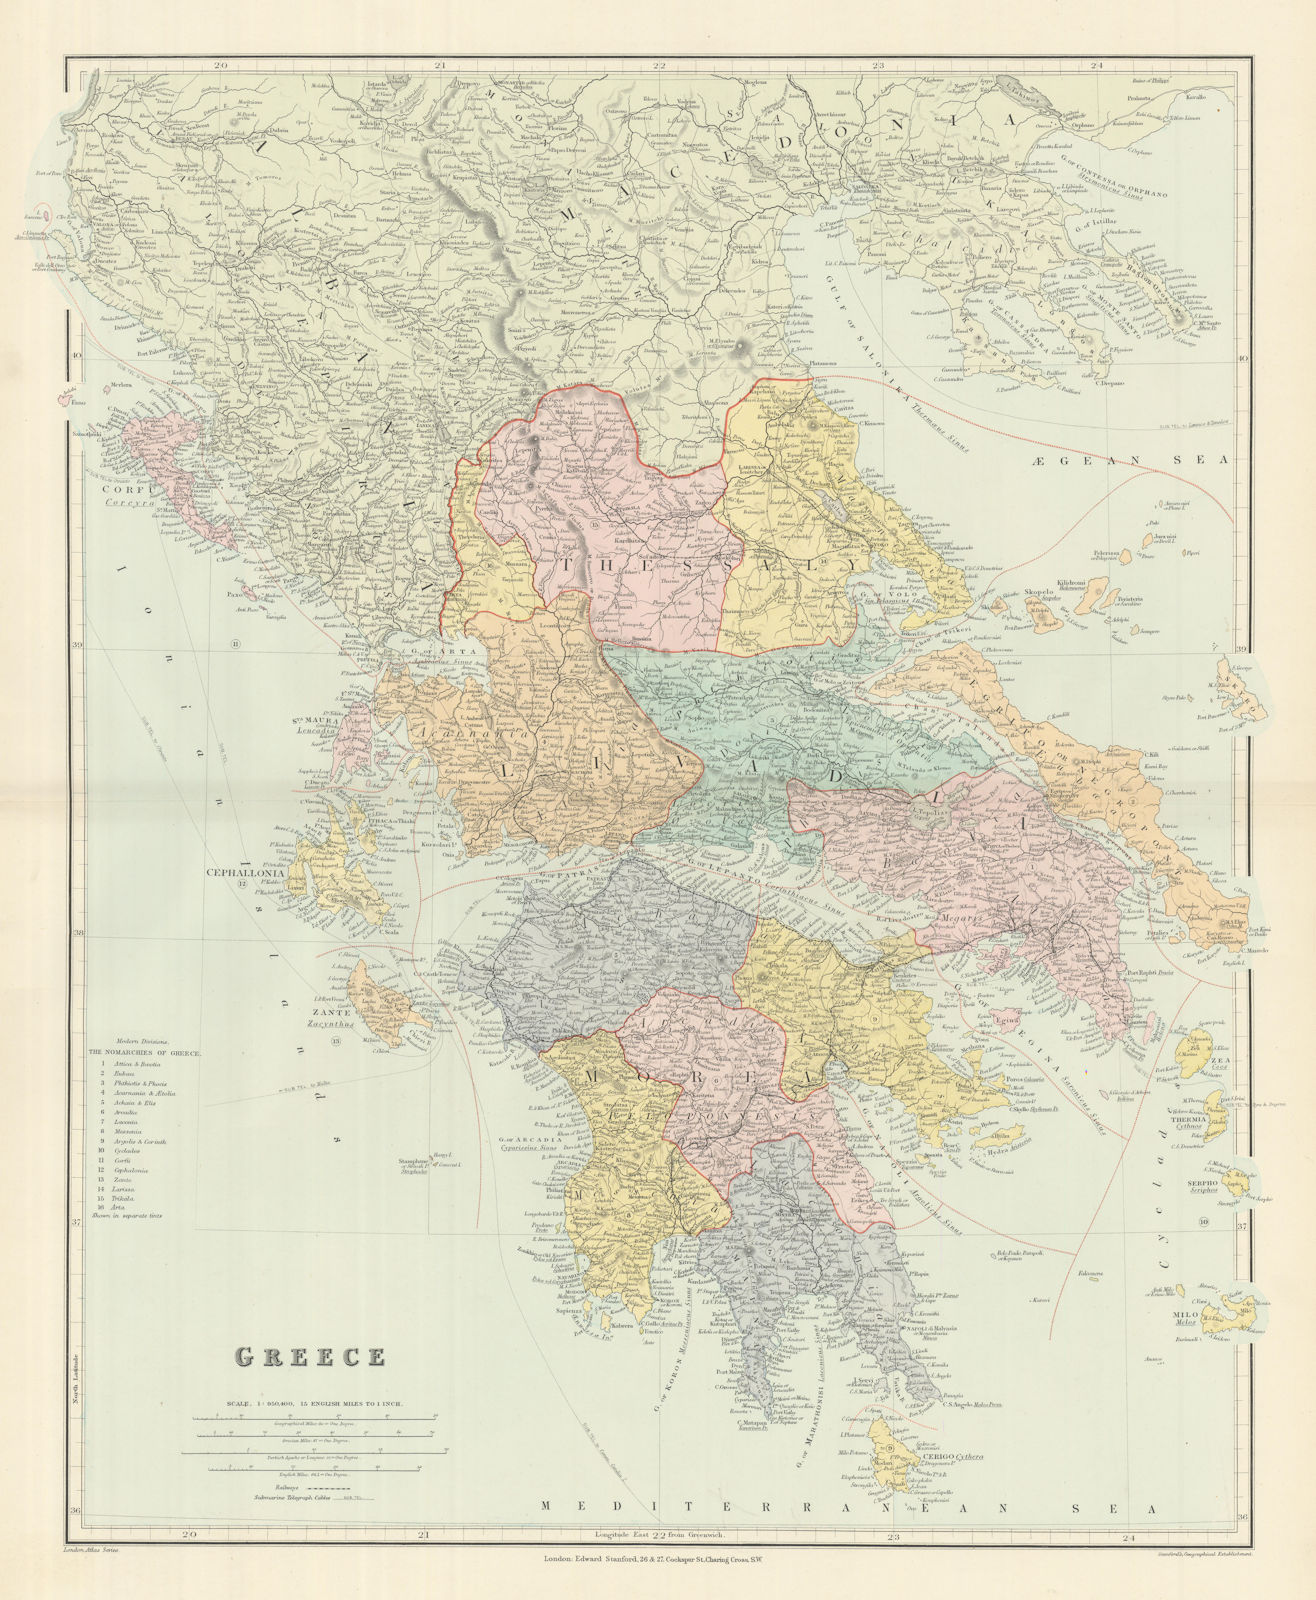 Greece. Nomarchies. Ionian Sporades Cyclades Morea Livadia. STANFORD 1894 map